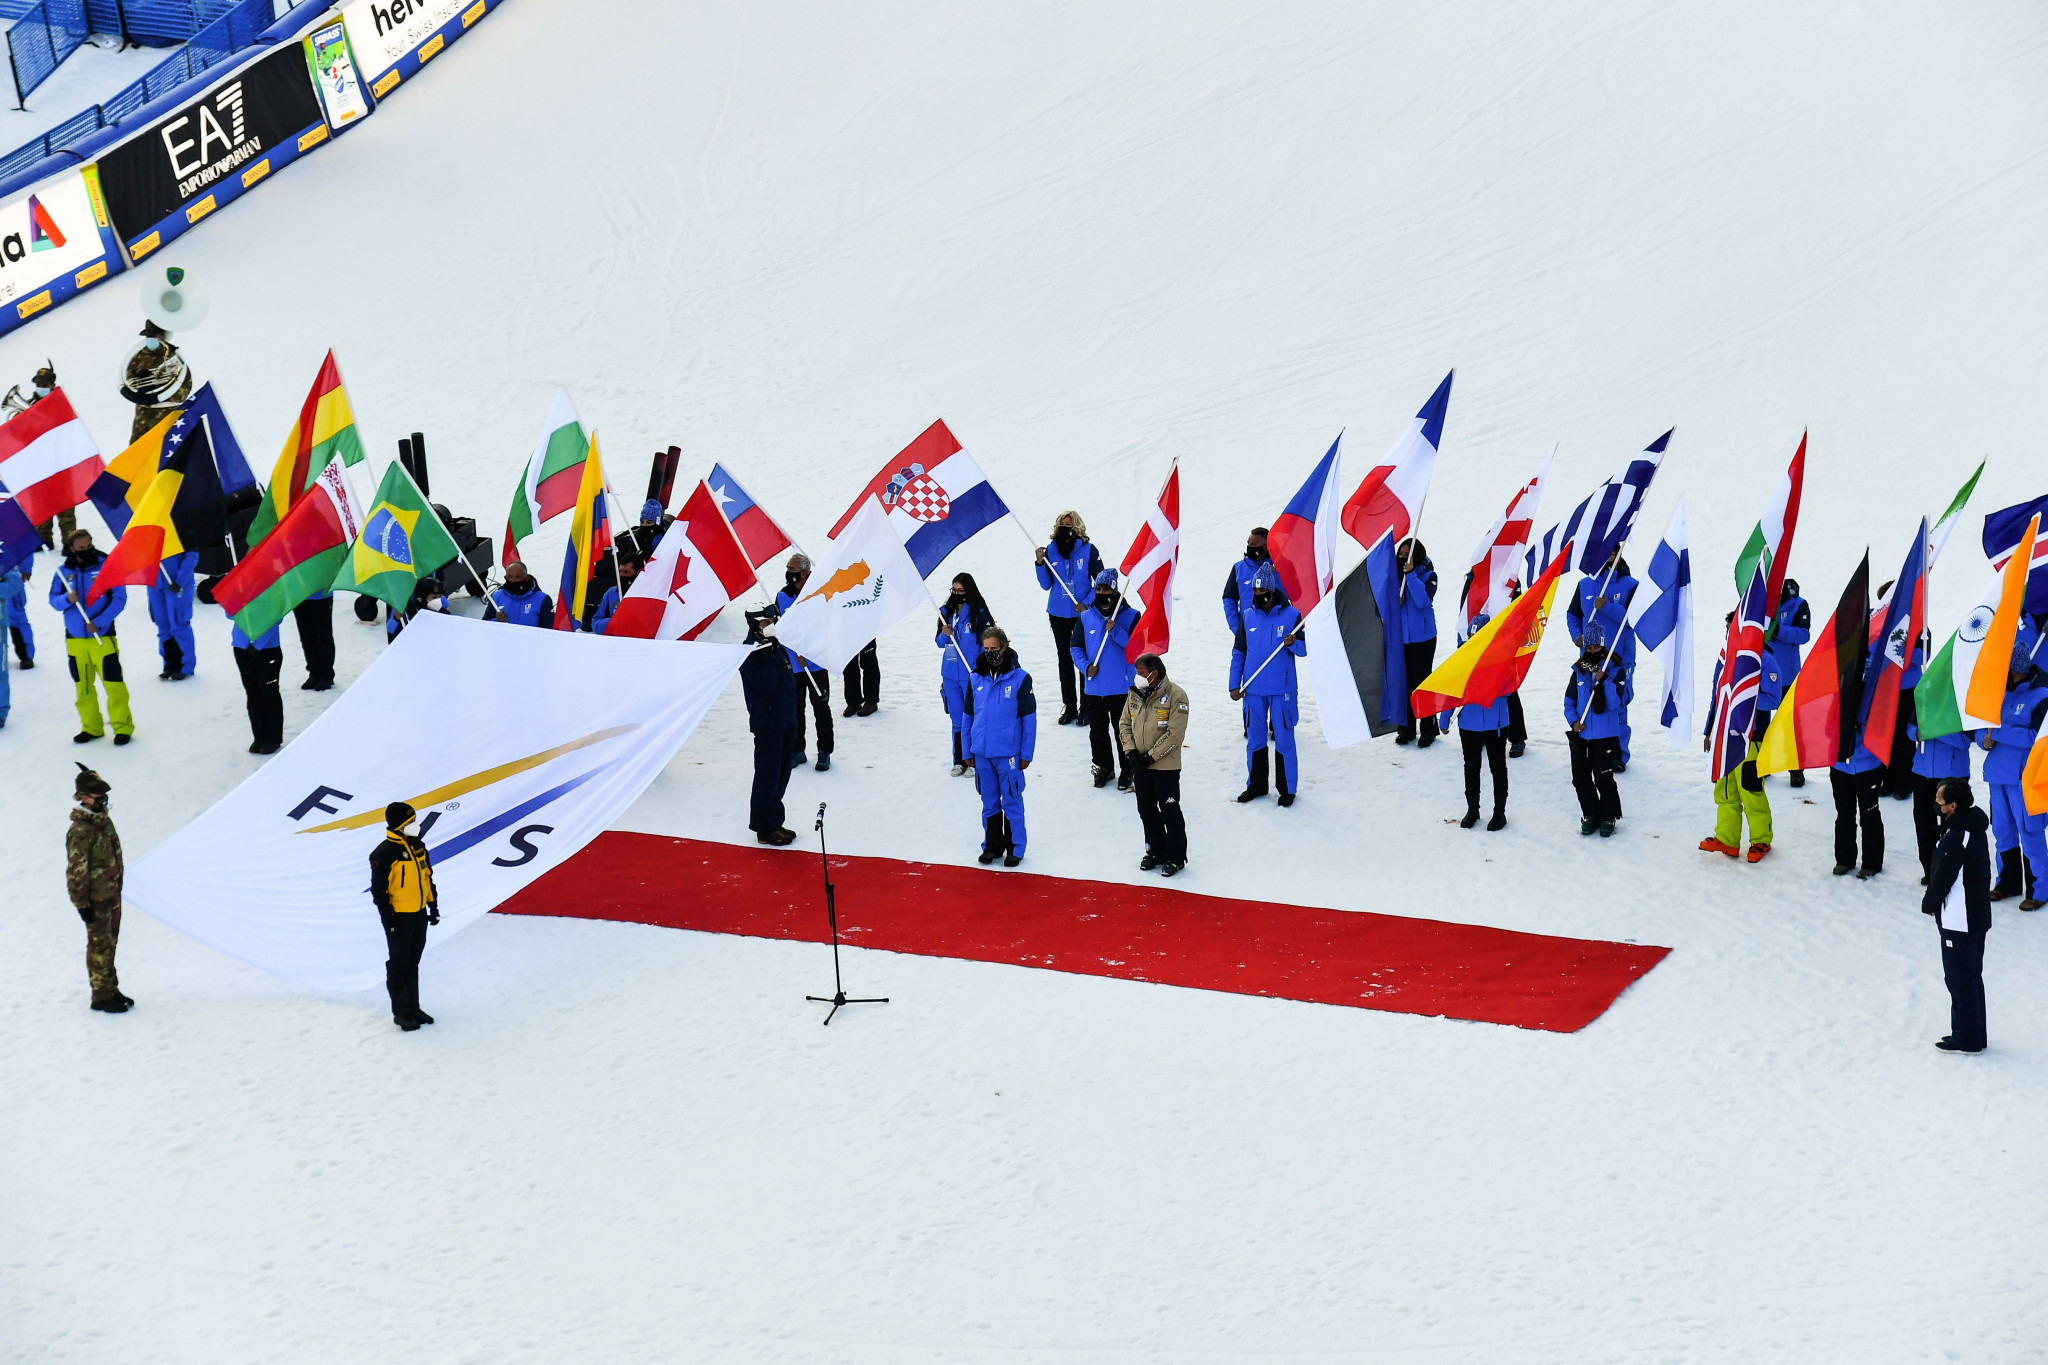 Michel Vion received the FIS flag during the Closing Ceremony of the 2021 Alpine Ski World Championships ©Getty Images